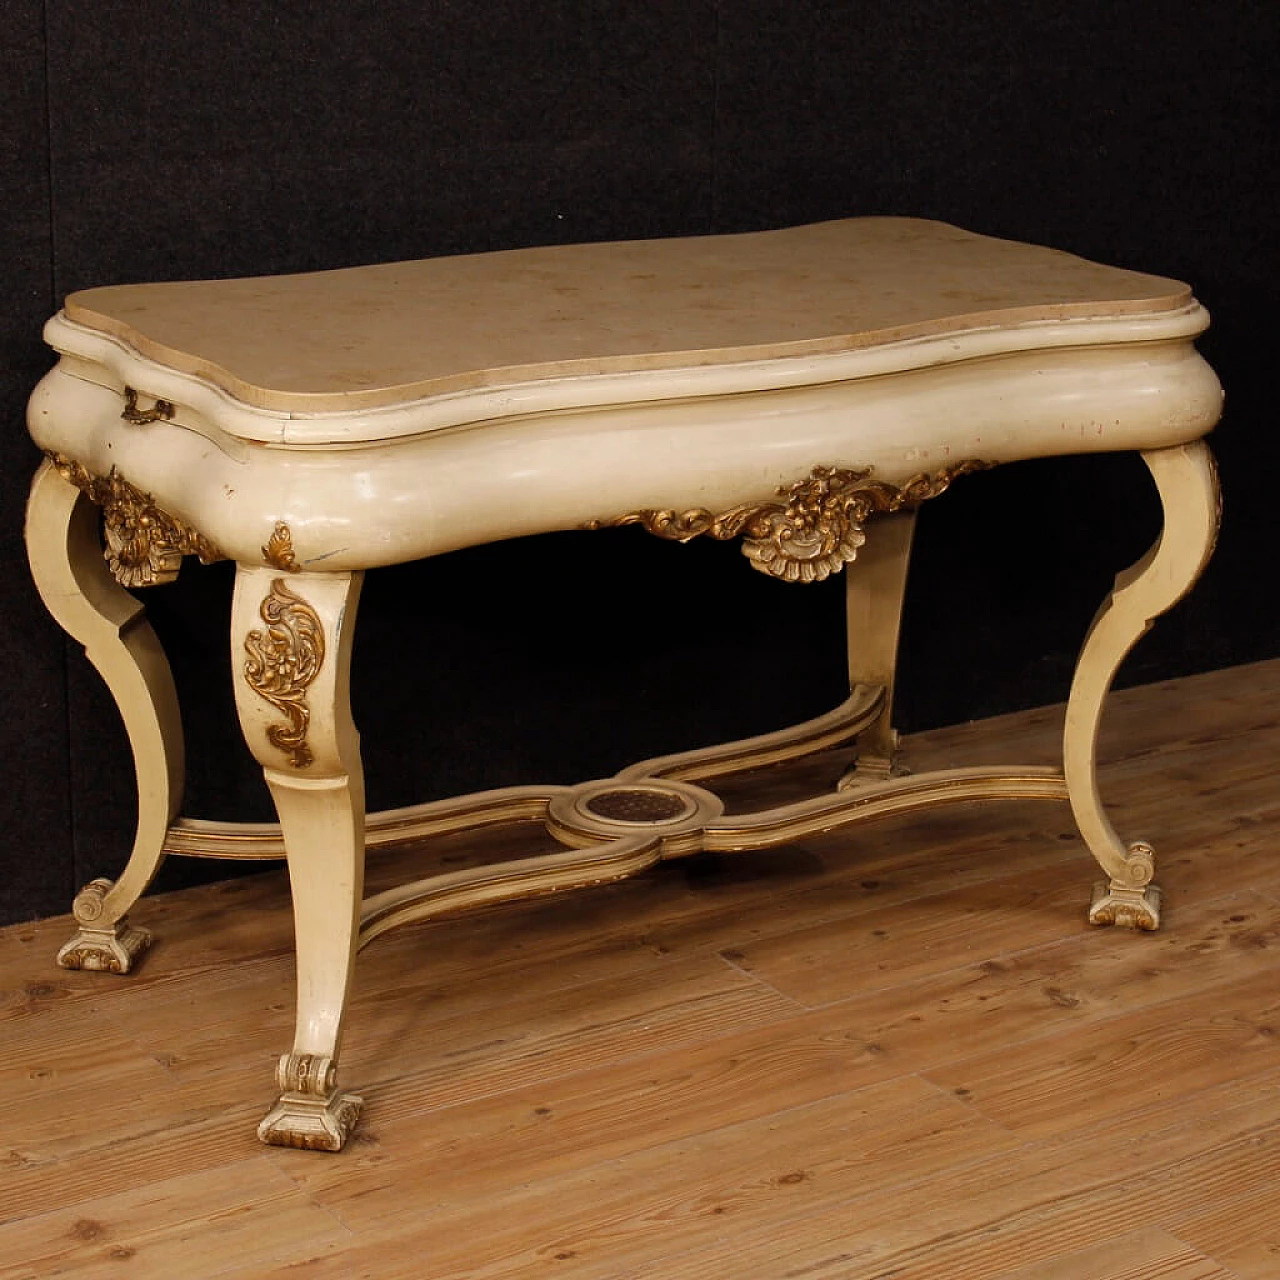 Carved, lacquered and gilded wooden table with marble top, 1940s 1